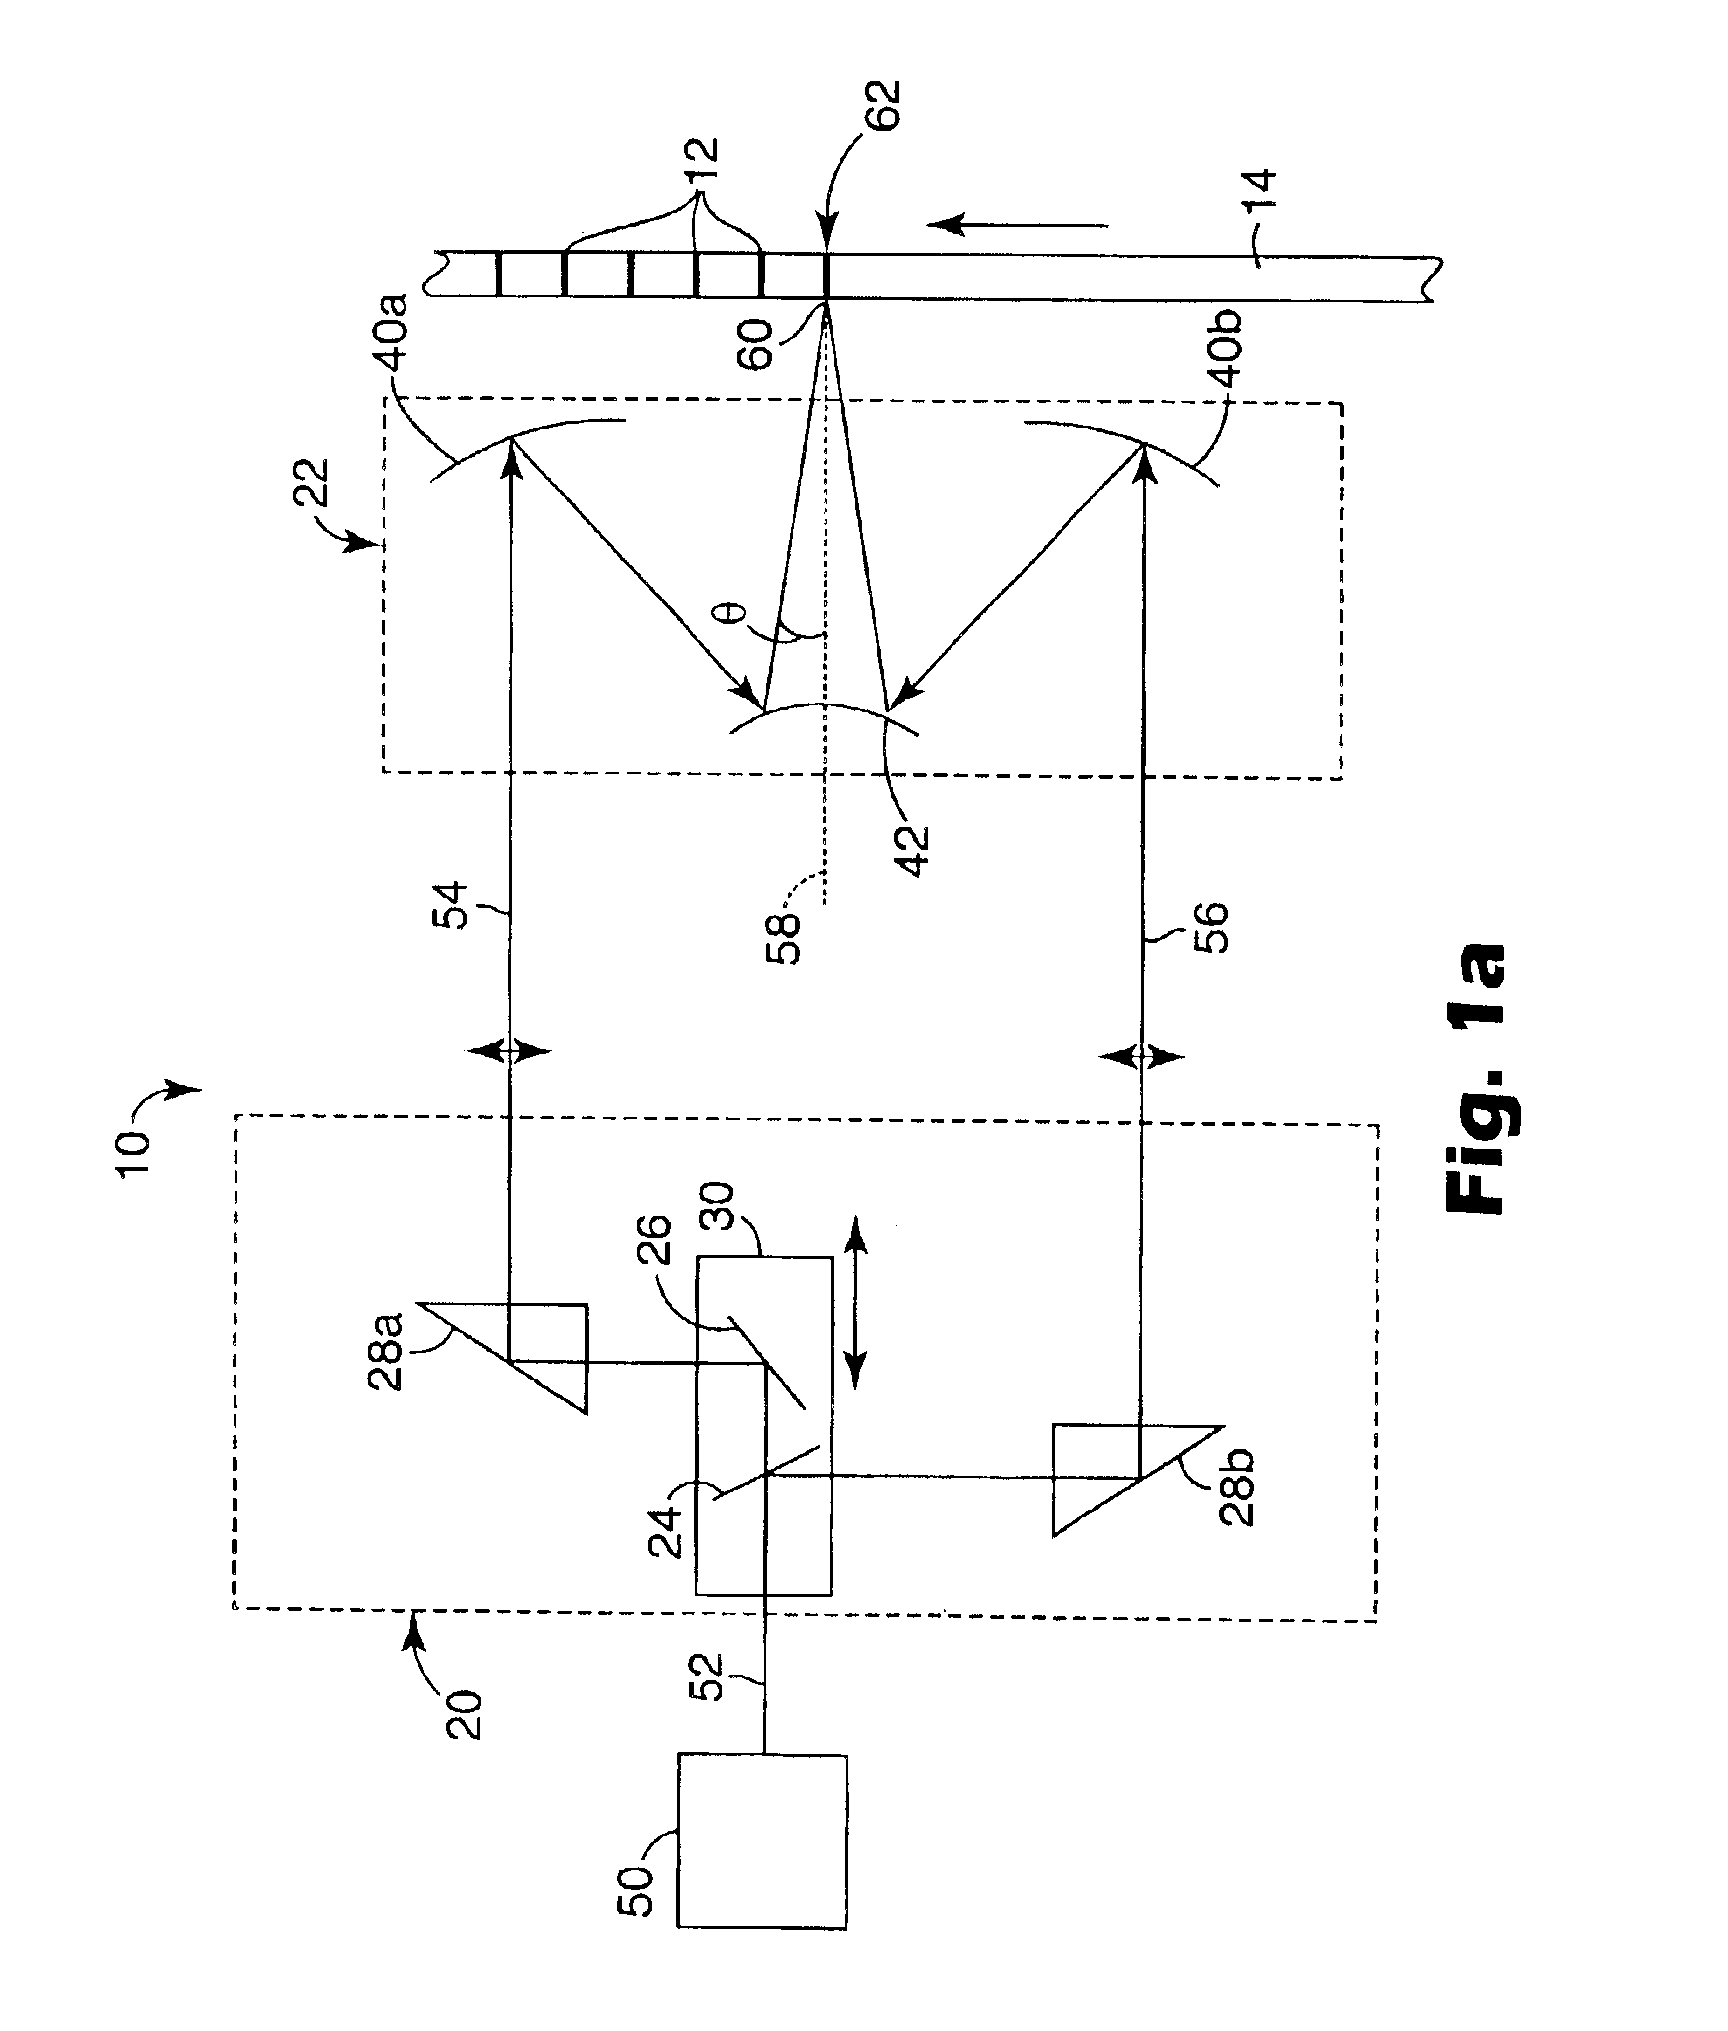 Fiber grating writing interferometer with continuous wavelength tuning and chirp capability